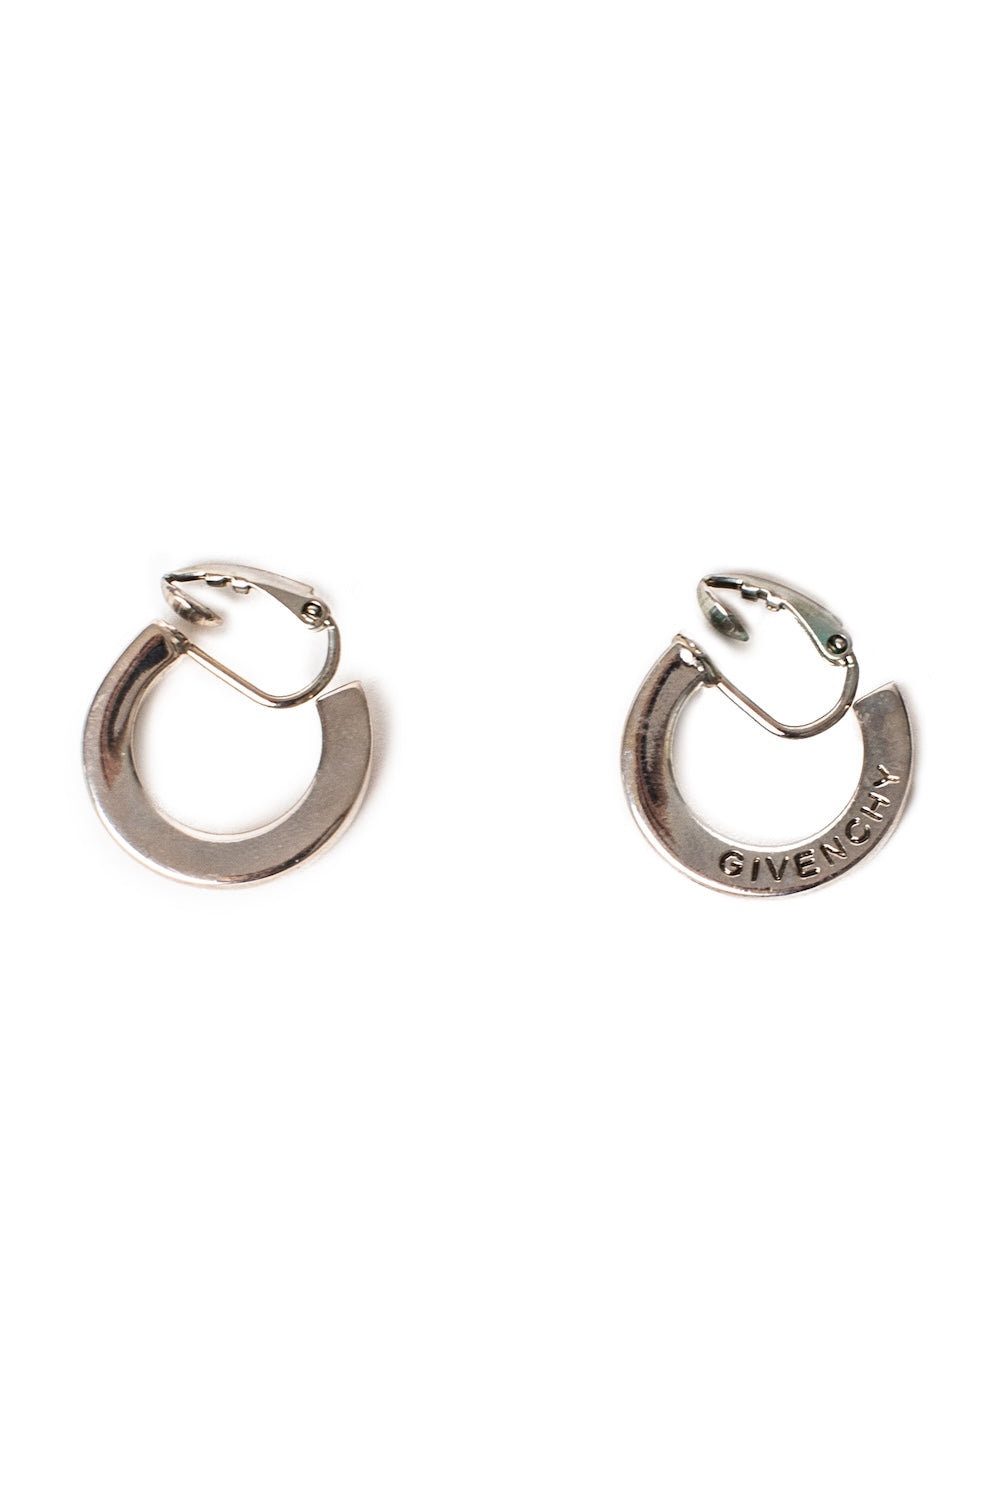 Givenchy <br> 80's silver logo hoop earrings